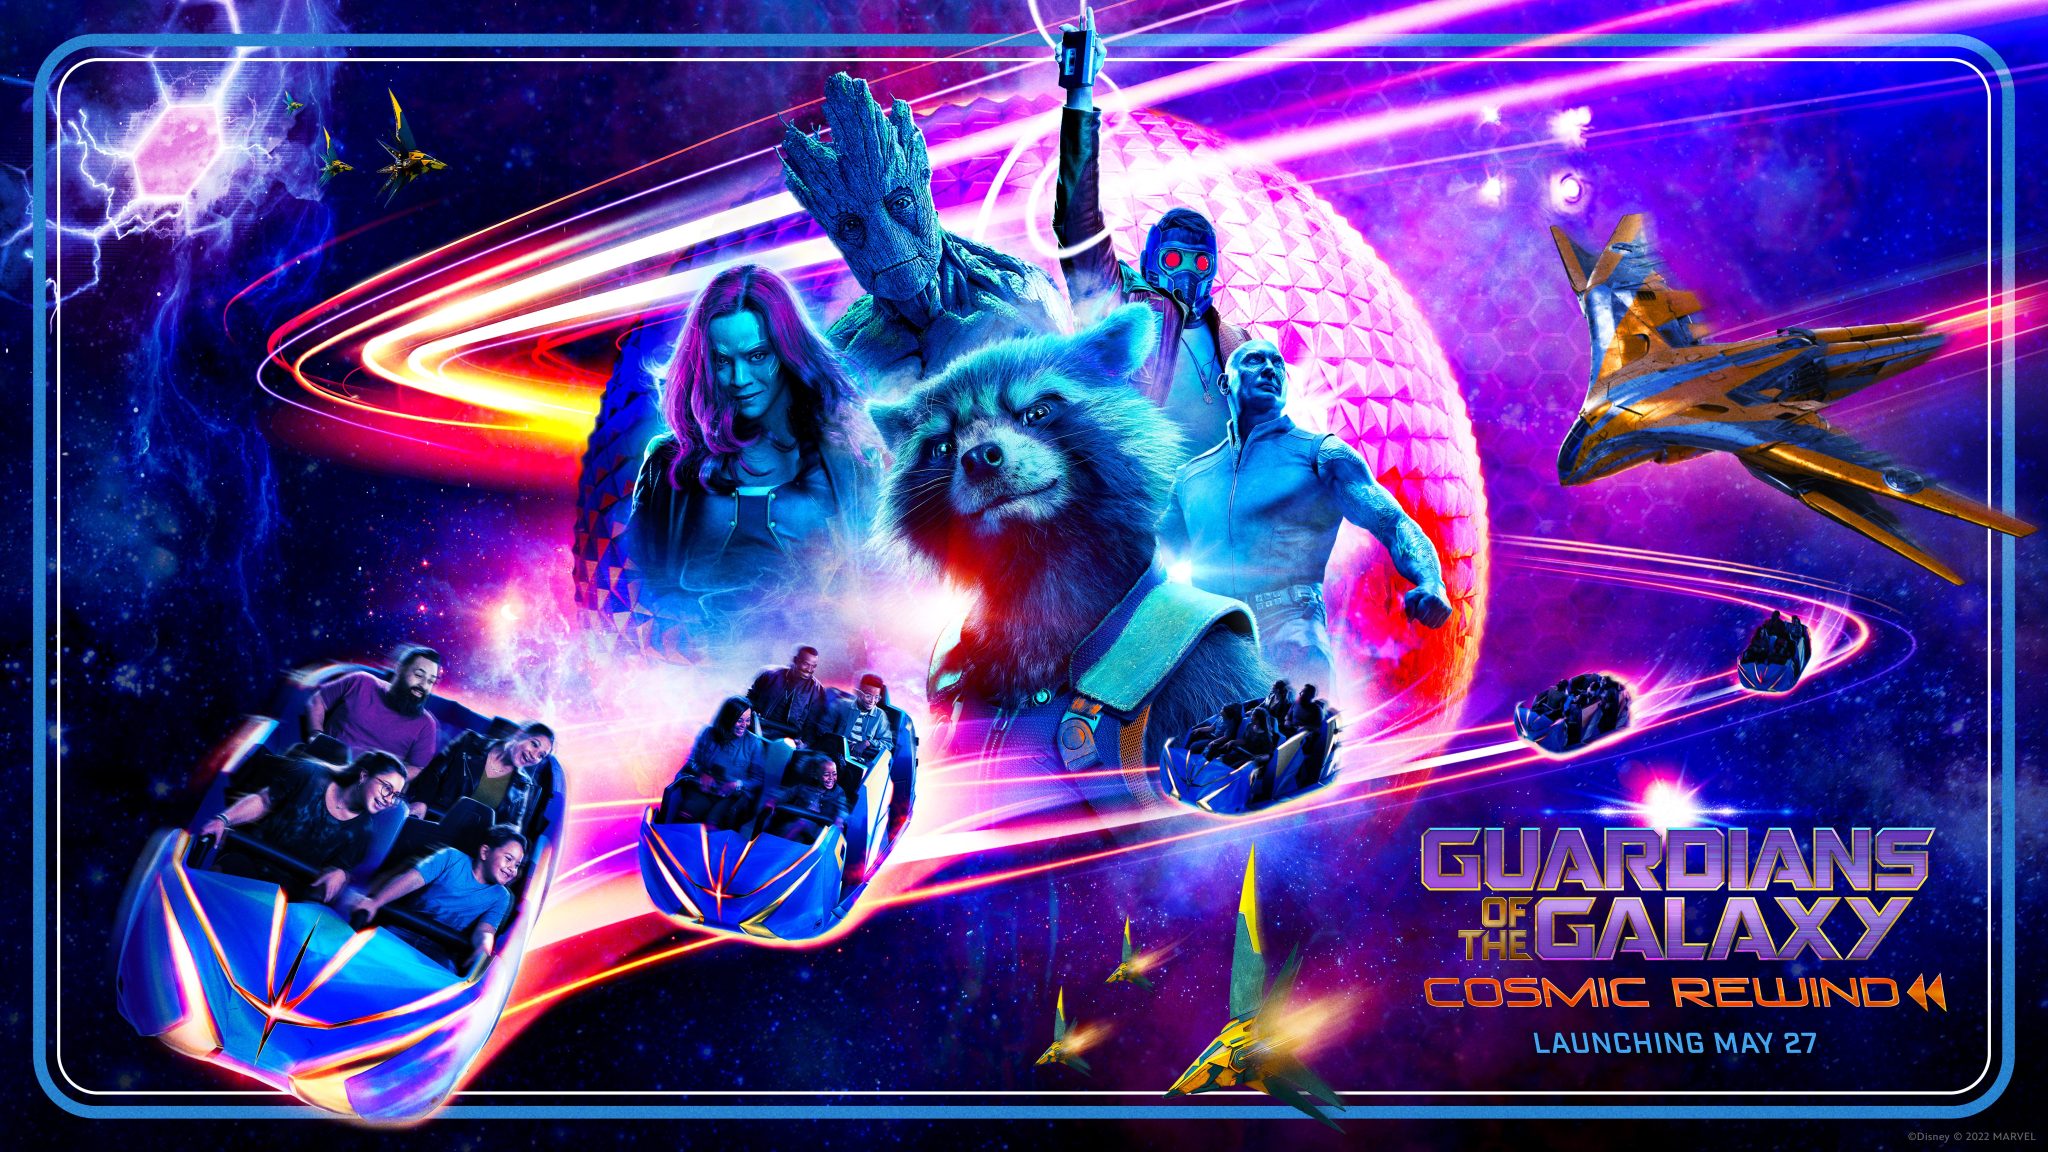 Guardians of the Galaxy: Cosmic Rewind Officially Opens May 27 at EPCOT